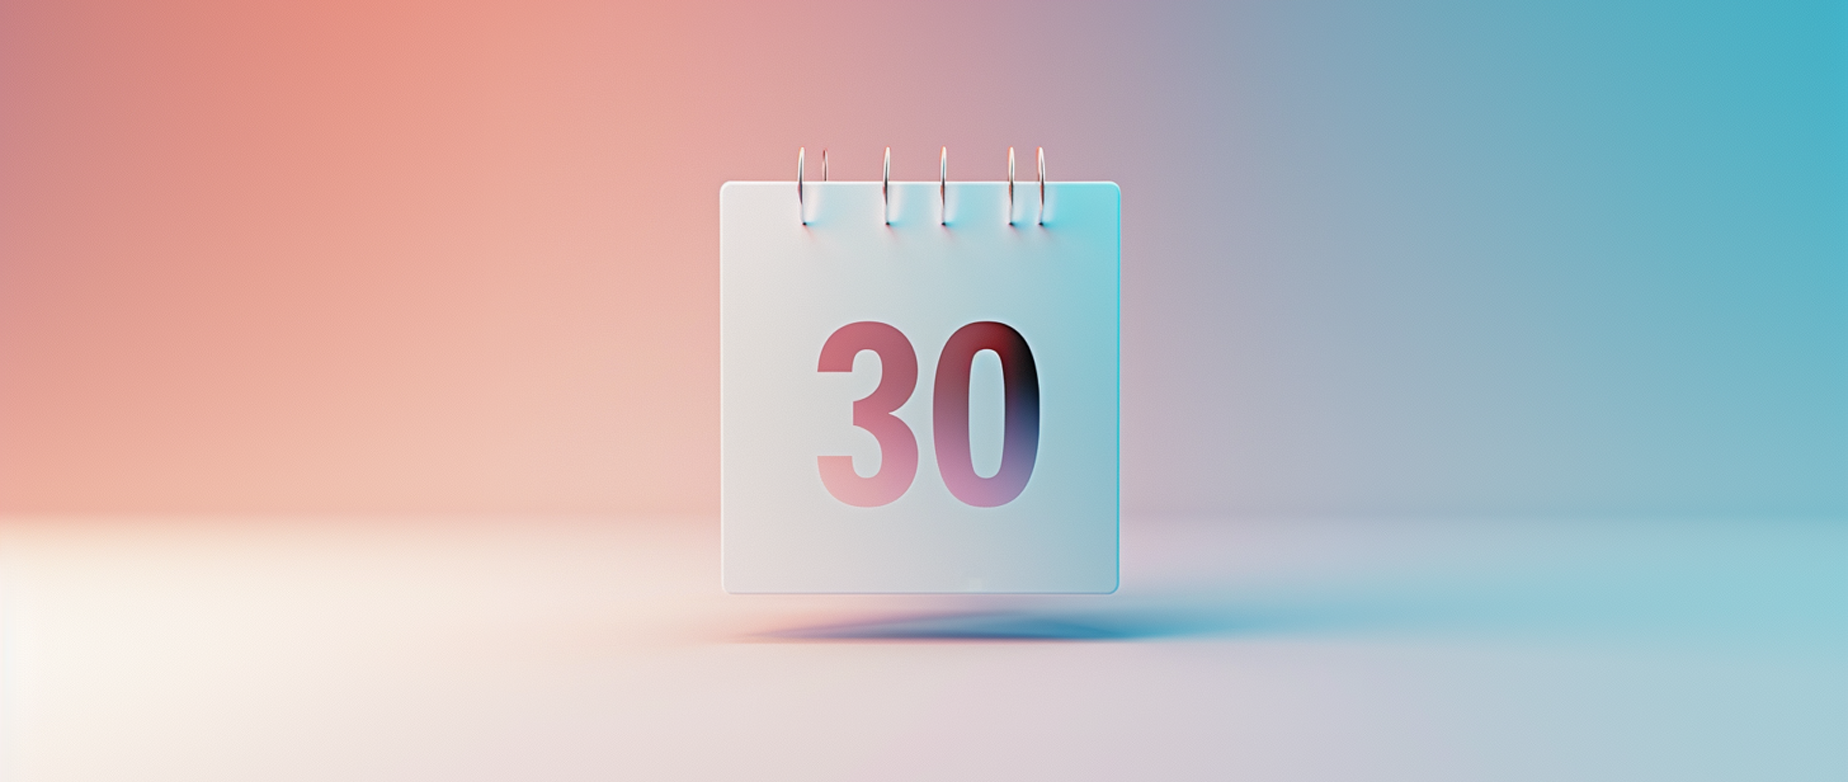 a calendar with the number 30 on it representing net 30 payment terms